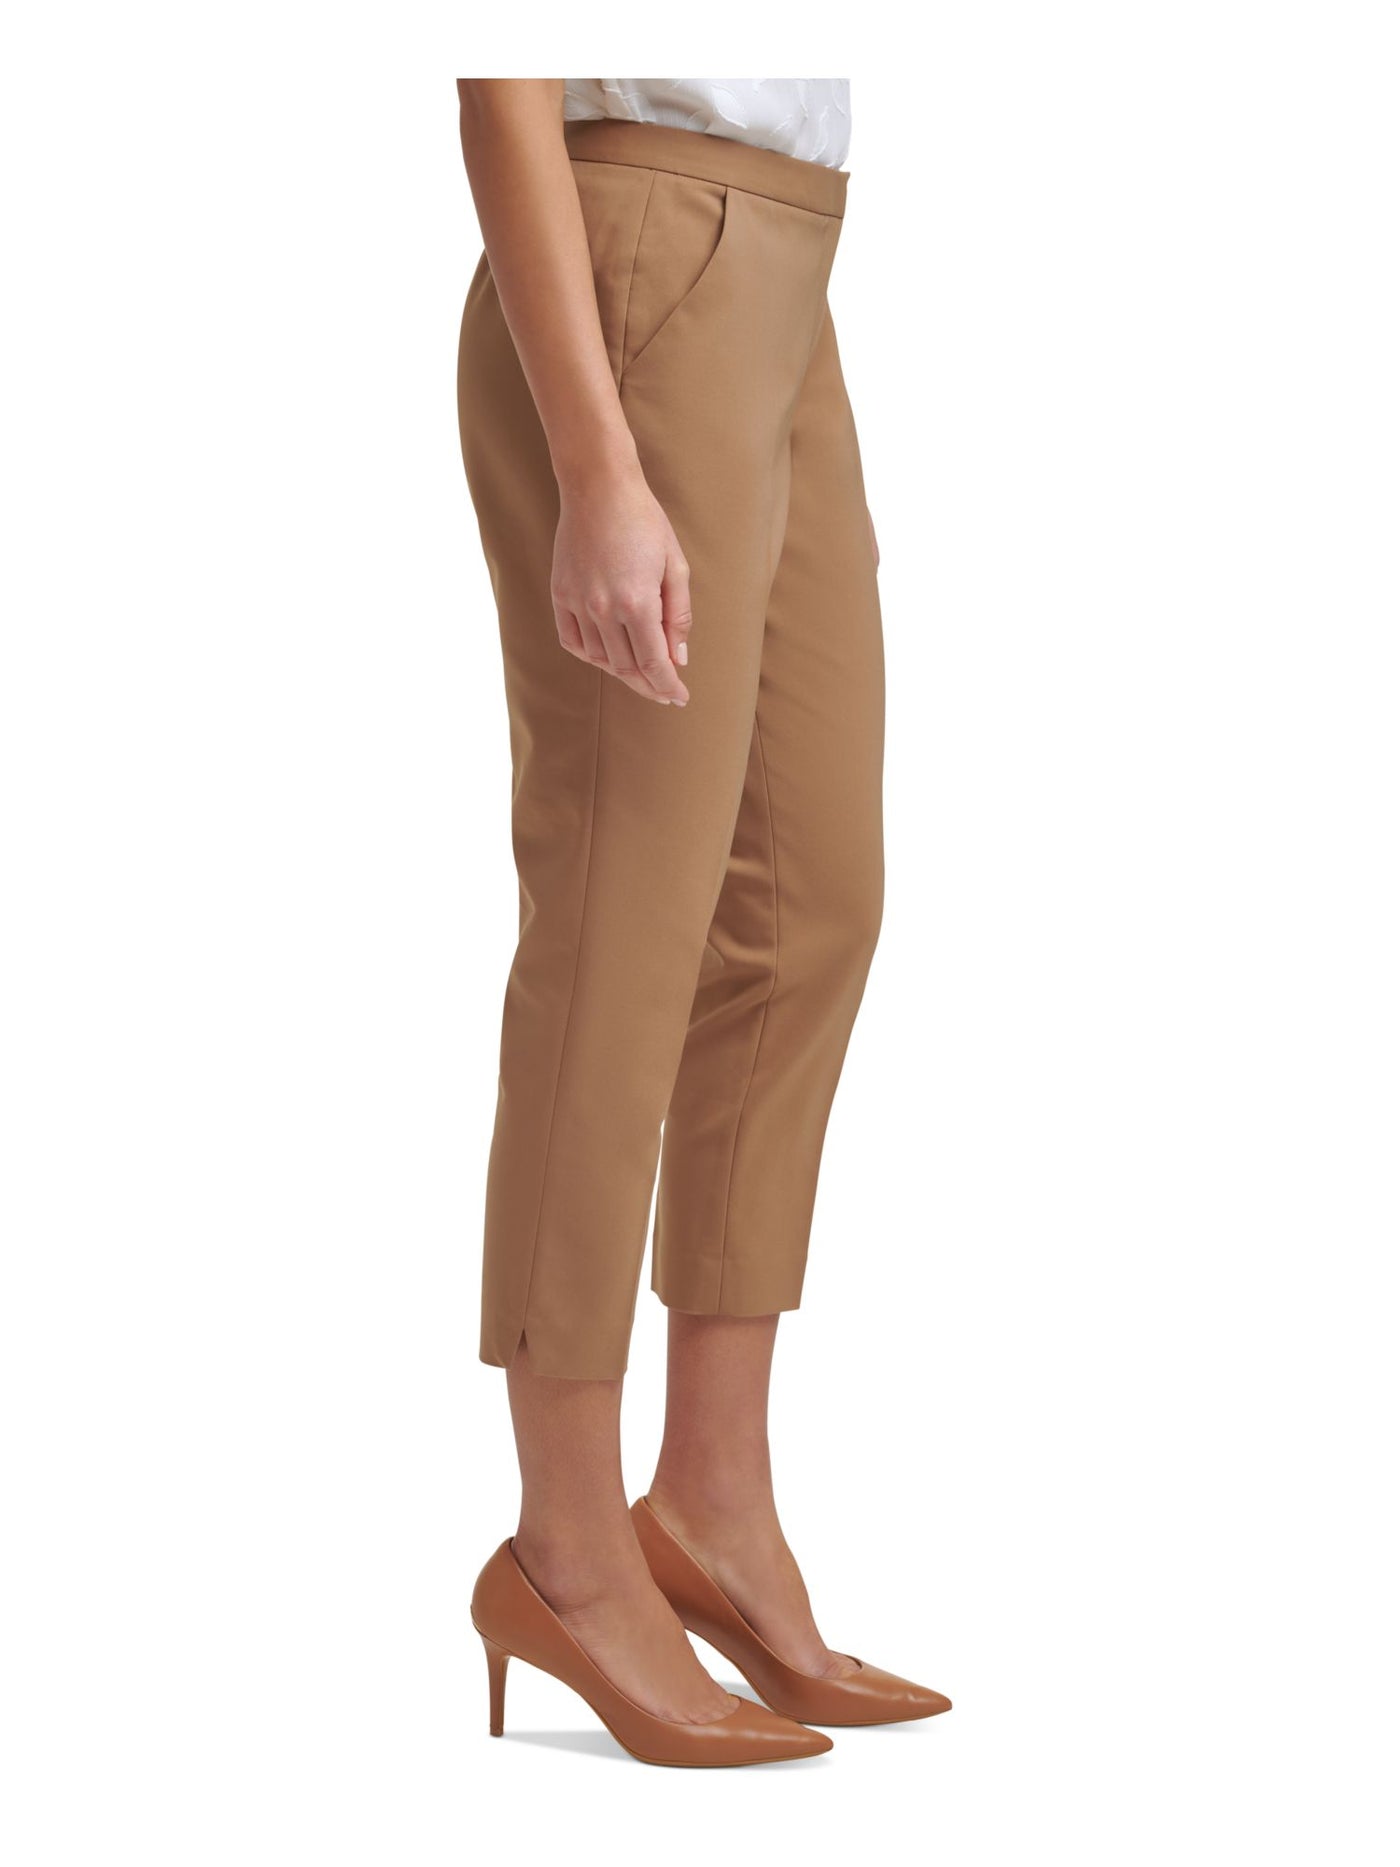 CALVIN KLEIN Womens Brown Stretch Darted Pocketed Mid Rise Straight Leg Cropped Pants Petites 6P